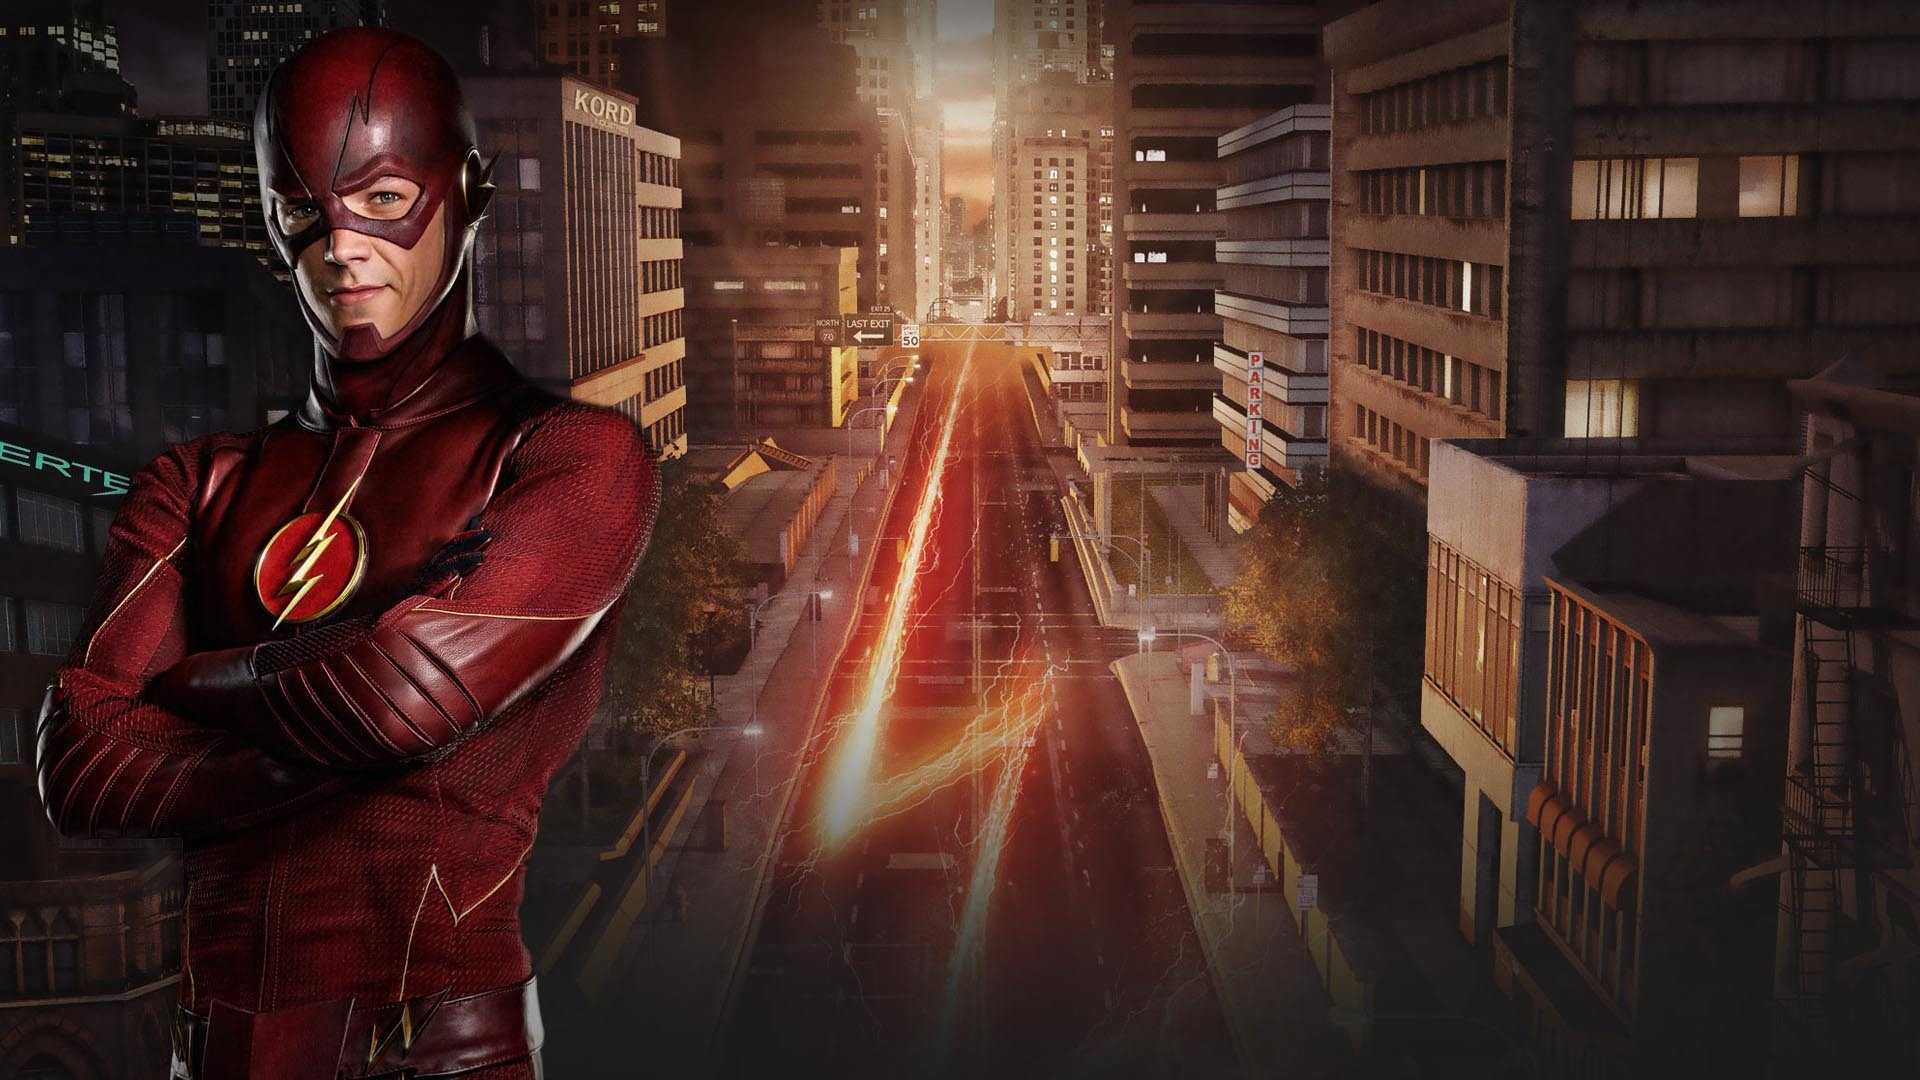 25 The Flash 2014 HD Wallpapers Backgrounds - Wallpaper Abyss